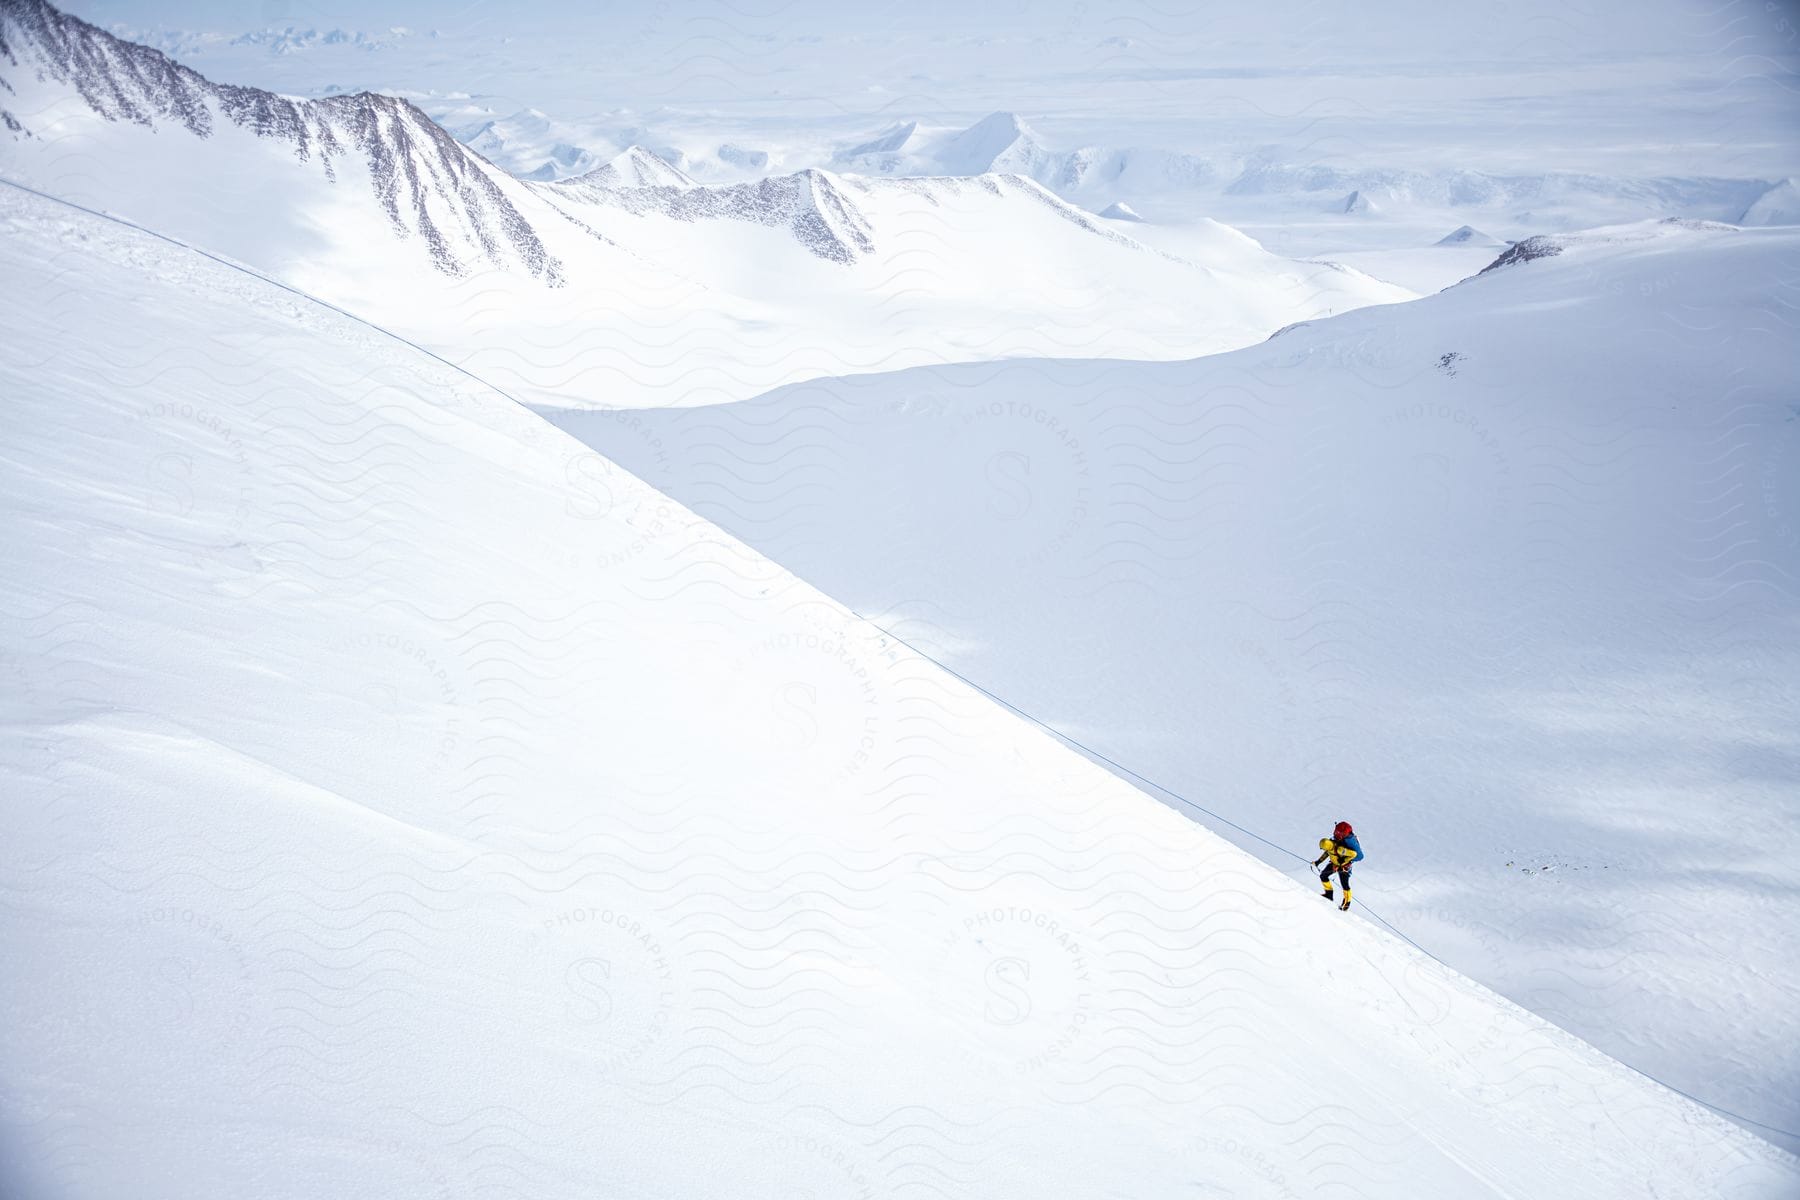 A person climbing snowy mountains in antarctica during the day